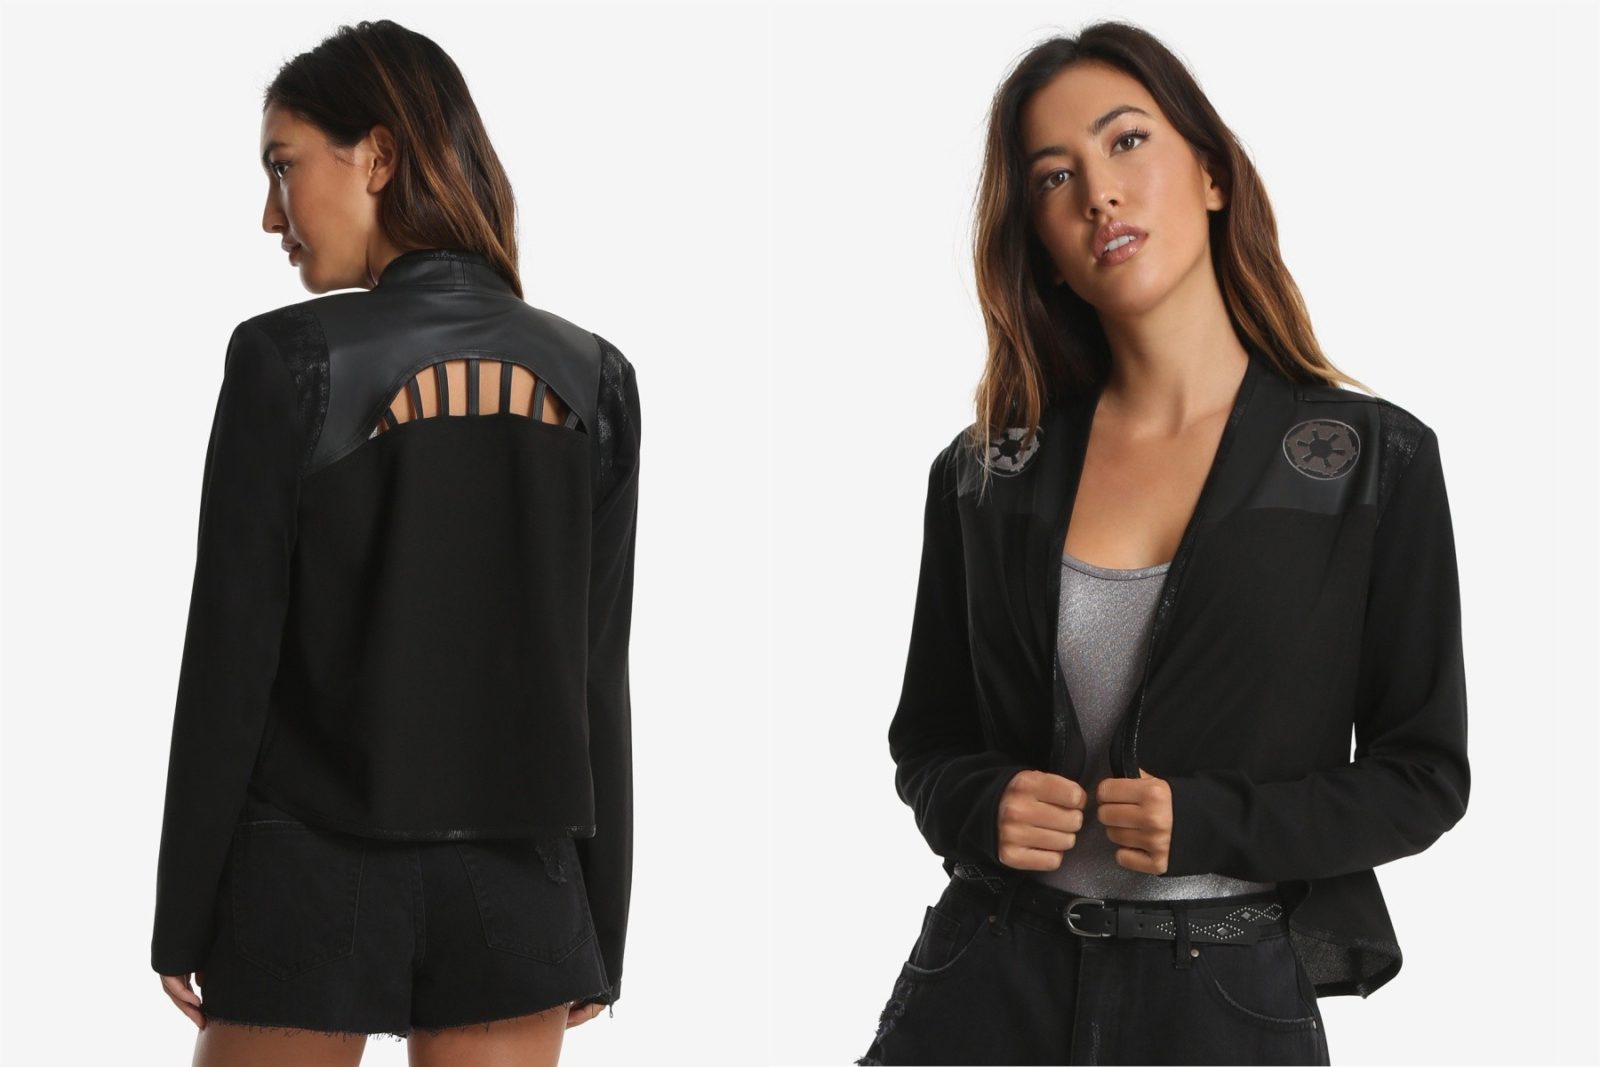 Women's Her Universe x Star Wars Imperial open jacket at Box Lunch